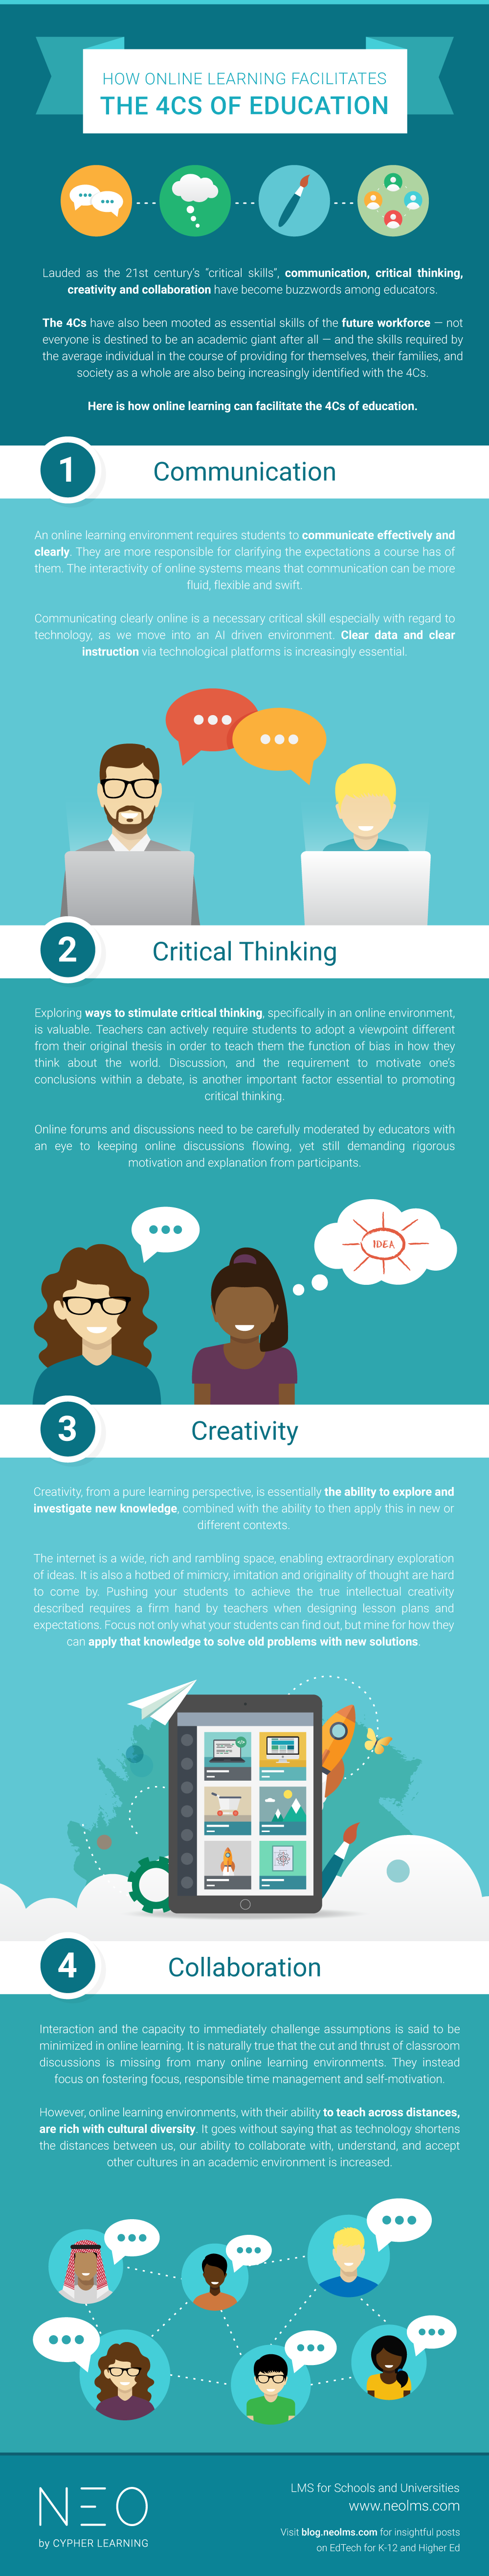 The 4 Cs of education online INFOGRAPHIC